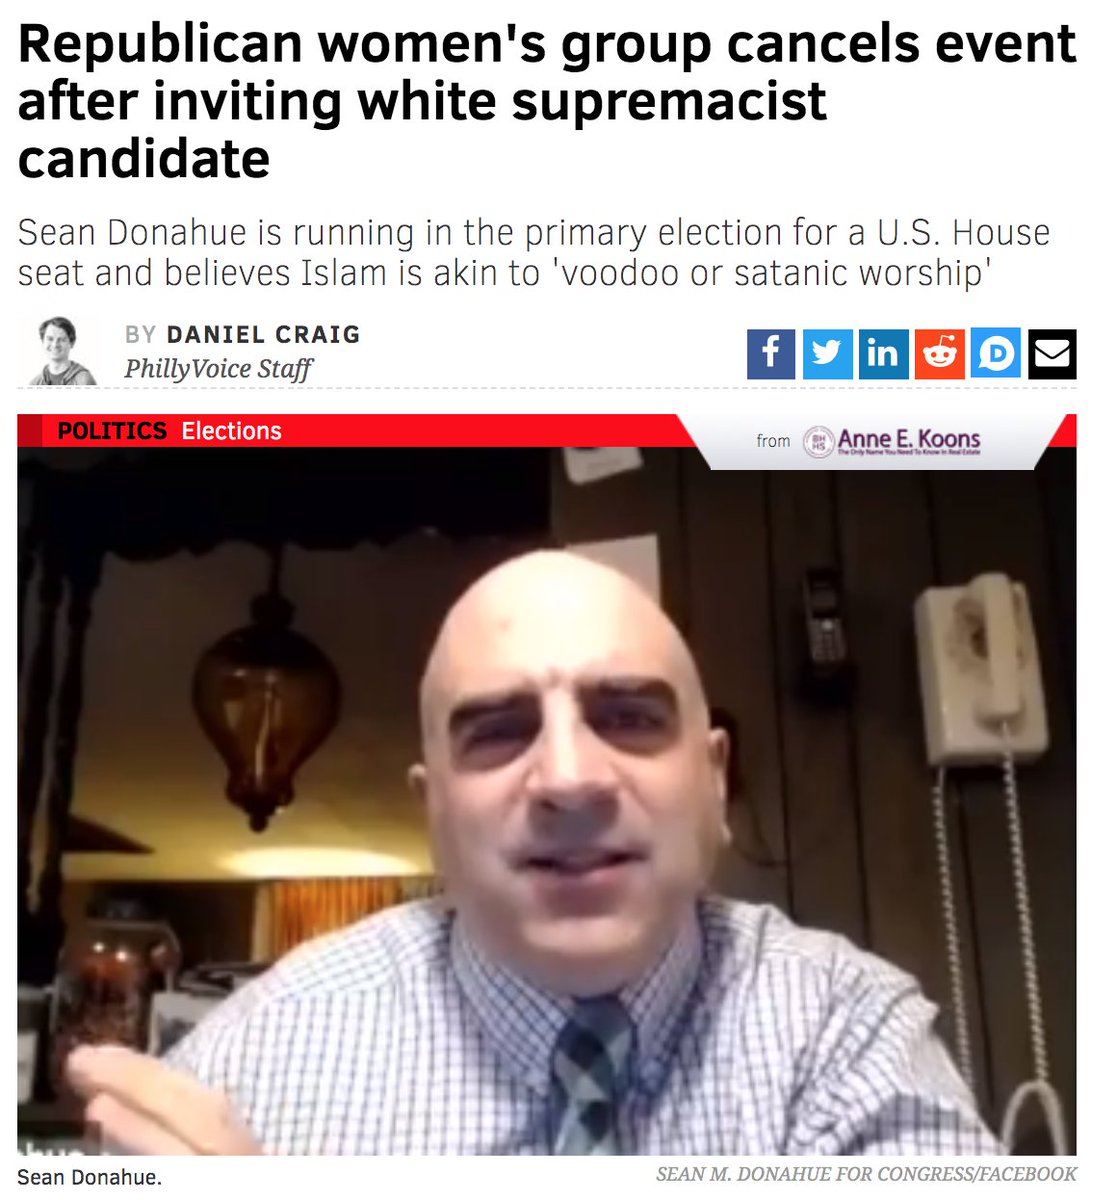 Speaking of white supremacists, Marsala also associates with Pennsylvania based Neo-Nazi Sean Donahue, who ran for Congress on a platform to bring back racial segregation. Donahue even reviewed Marsala’s self-published book on Amazon. Five stars!